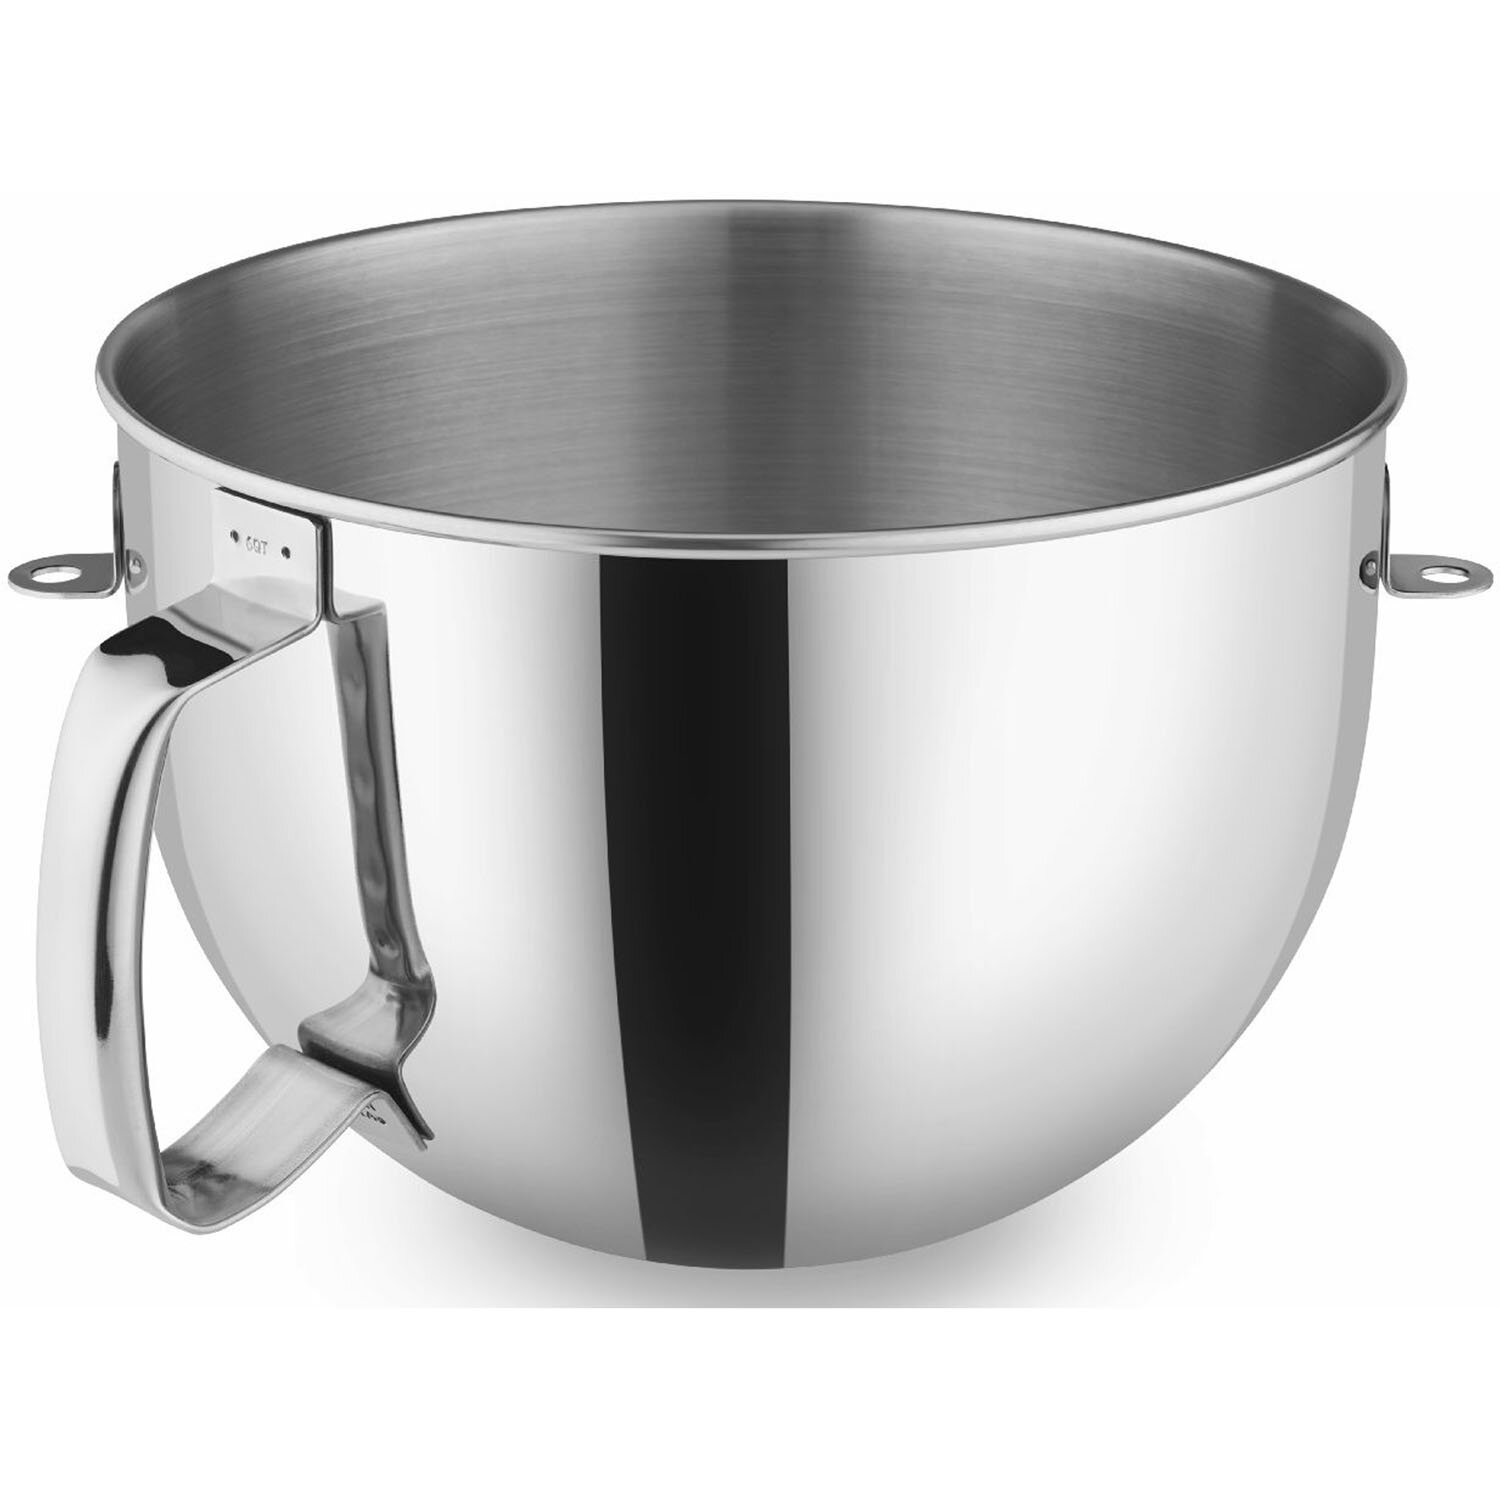 KitchenAid® 6 Quart Bowl-Lift Polished Stainless Steel Bowl with